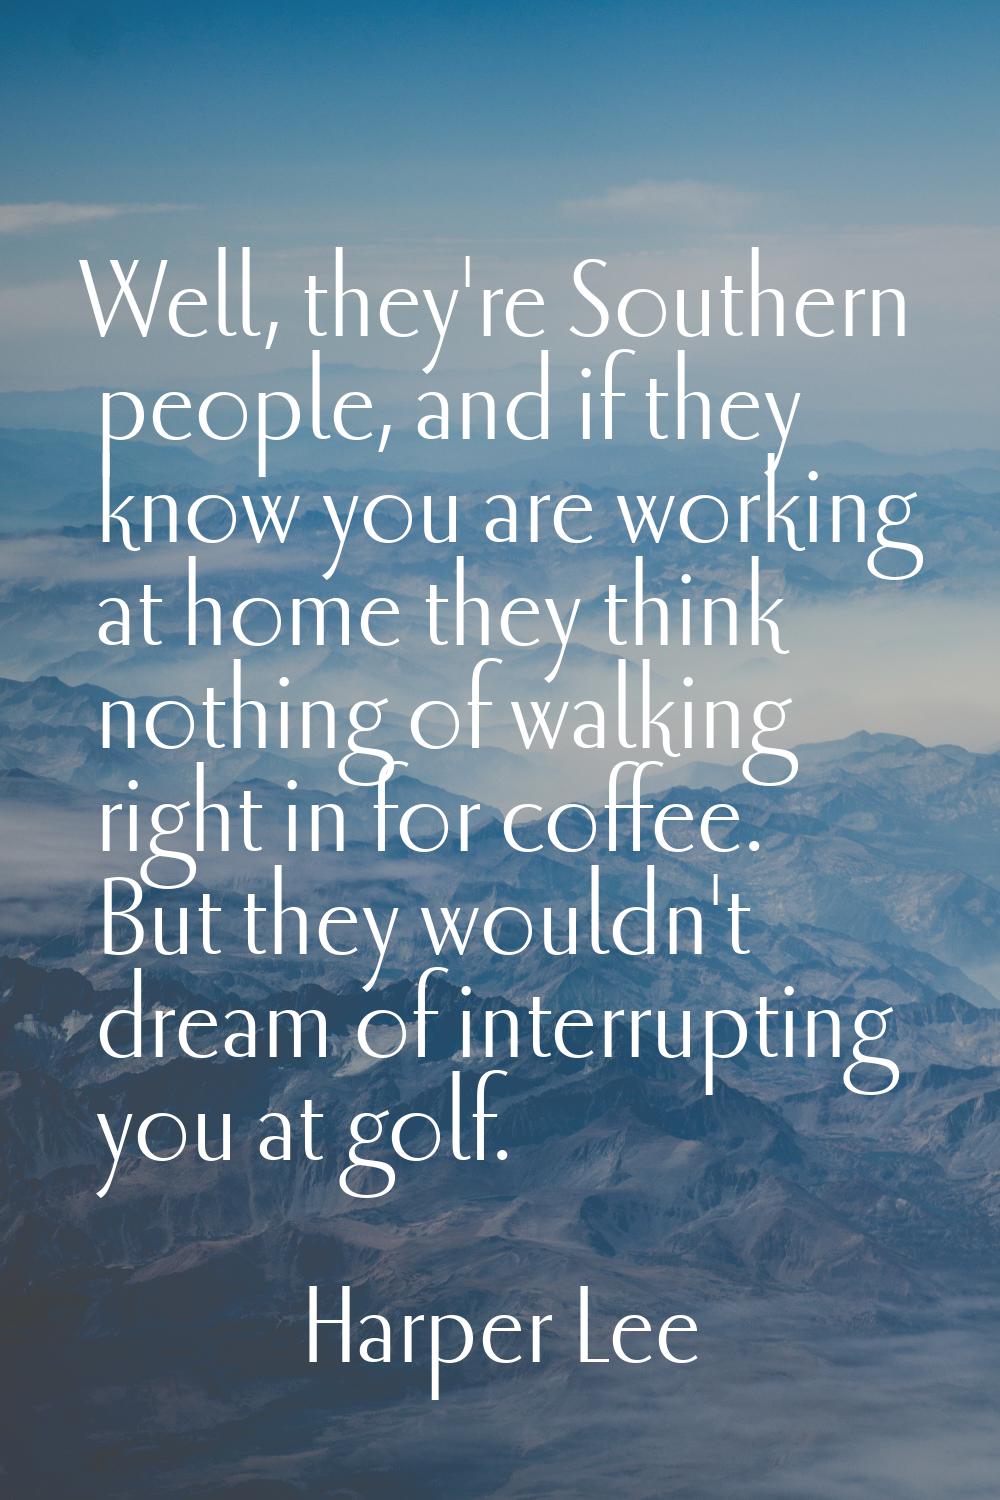 Well, they're Southern people, and if they know you are working at home they think nothing of walki